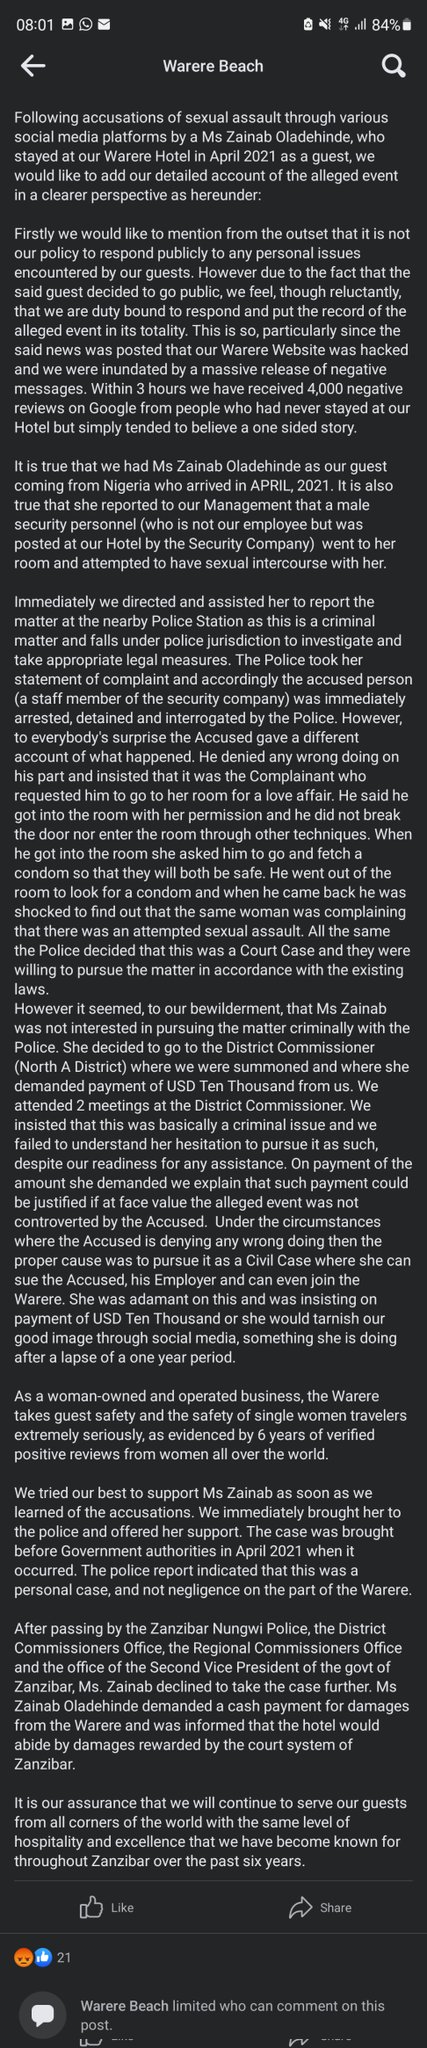 Warere hotel in Zanzibar narrates side of story with 23-year-old Nigerian lady who was assaulted on their property